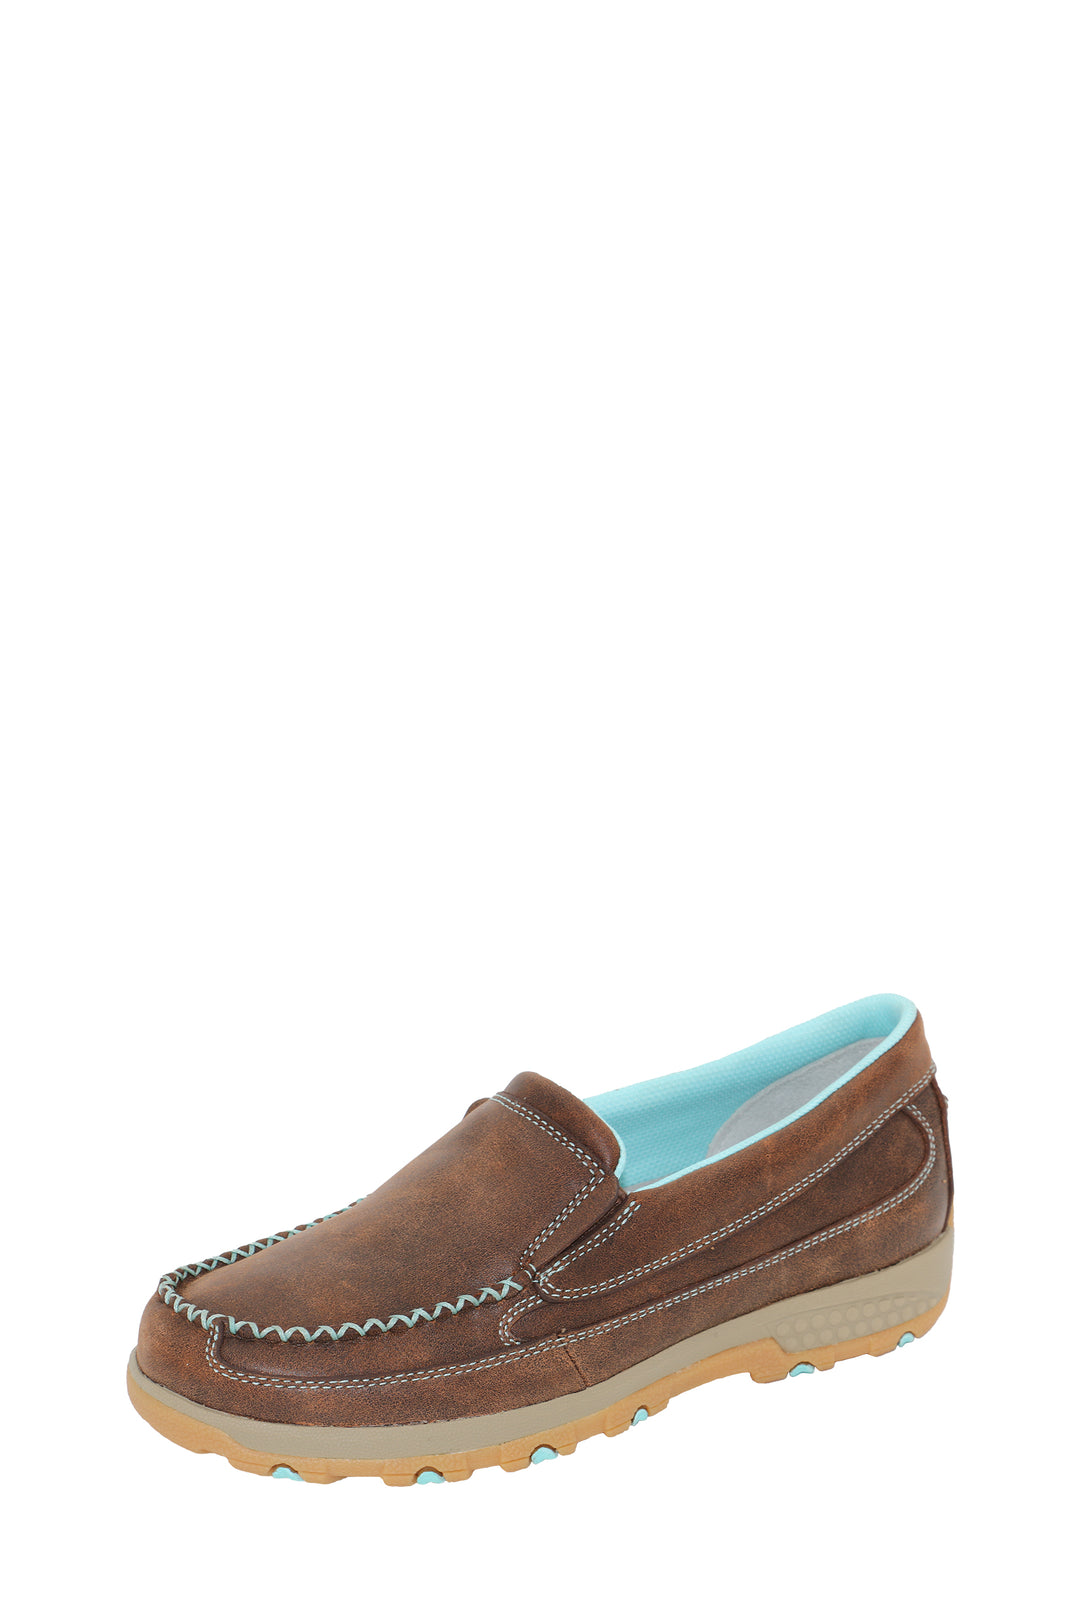 Twisted X - Womens Turquoise Cell Stretch Mocs